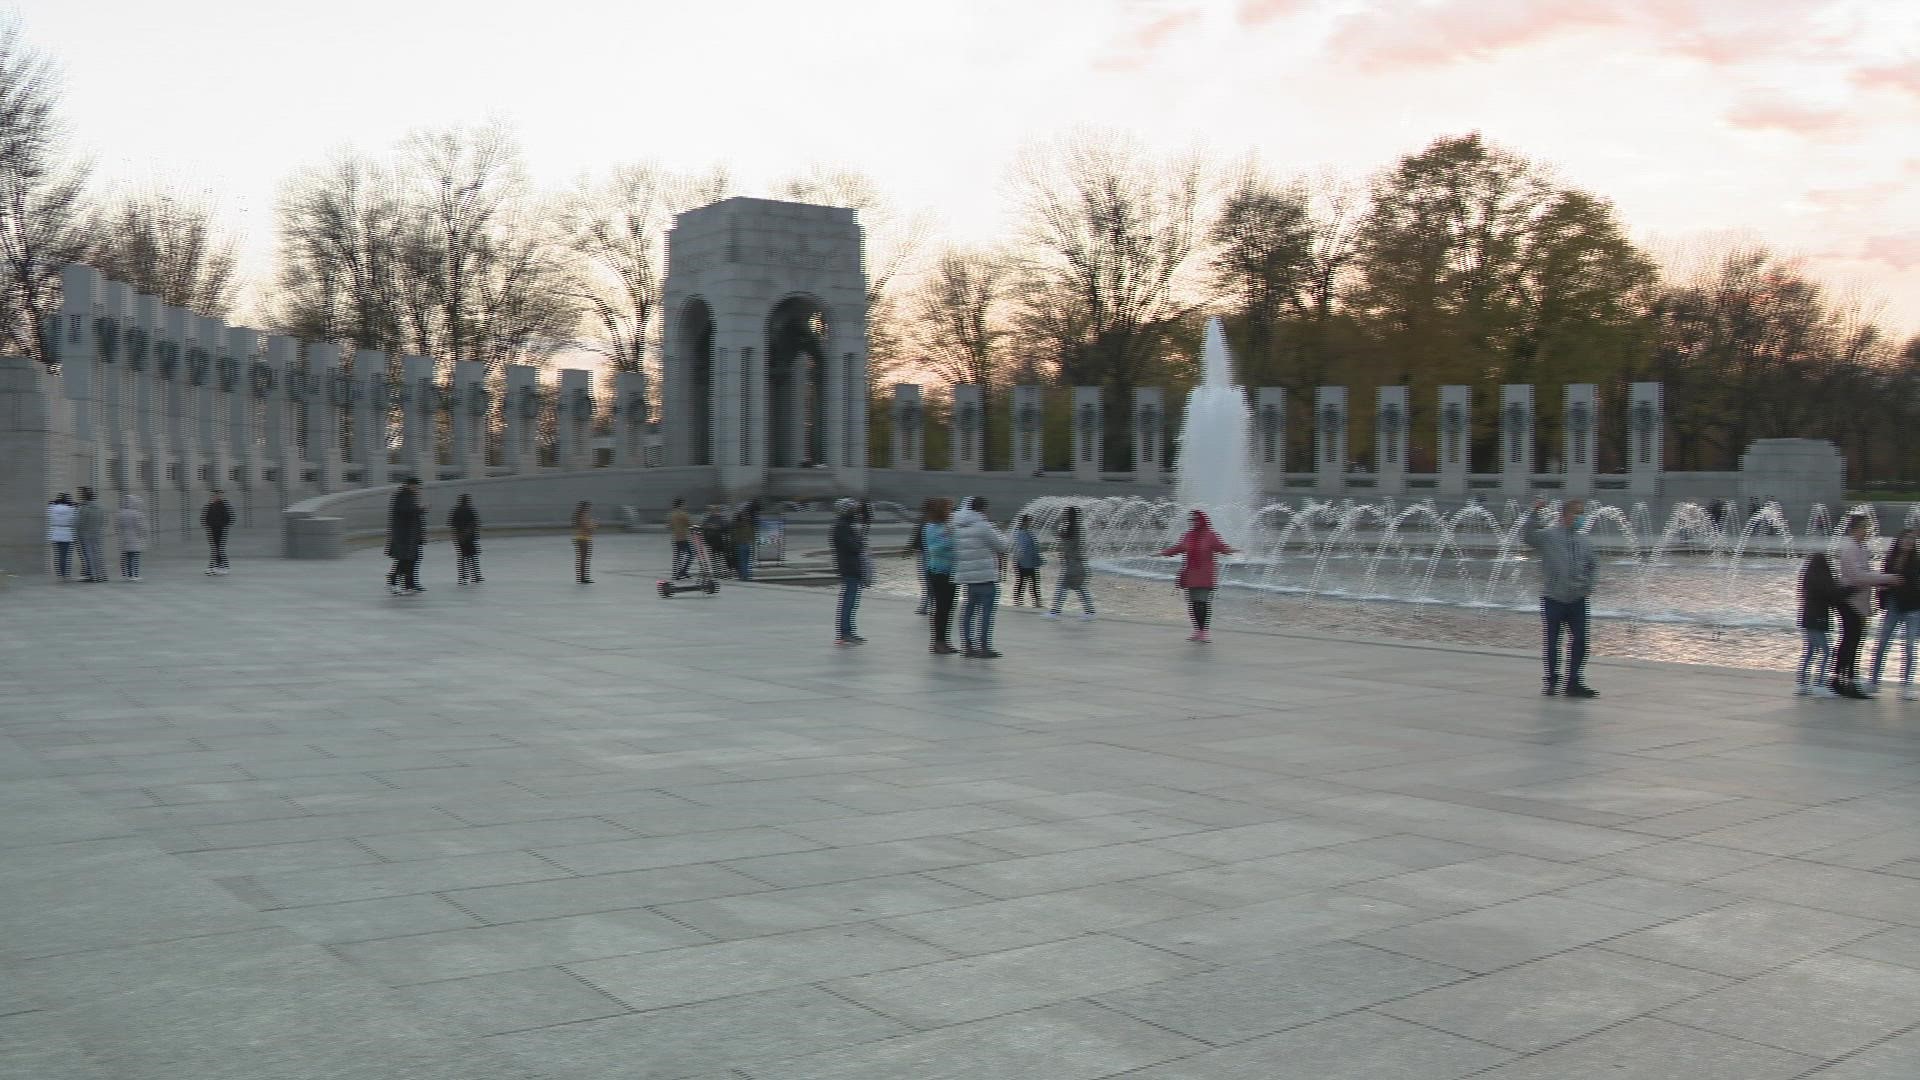 On Sunday, the World War II Memorial served as a spot for others to reflect on the legacy of the veteran and longtime senator from Kansas.